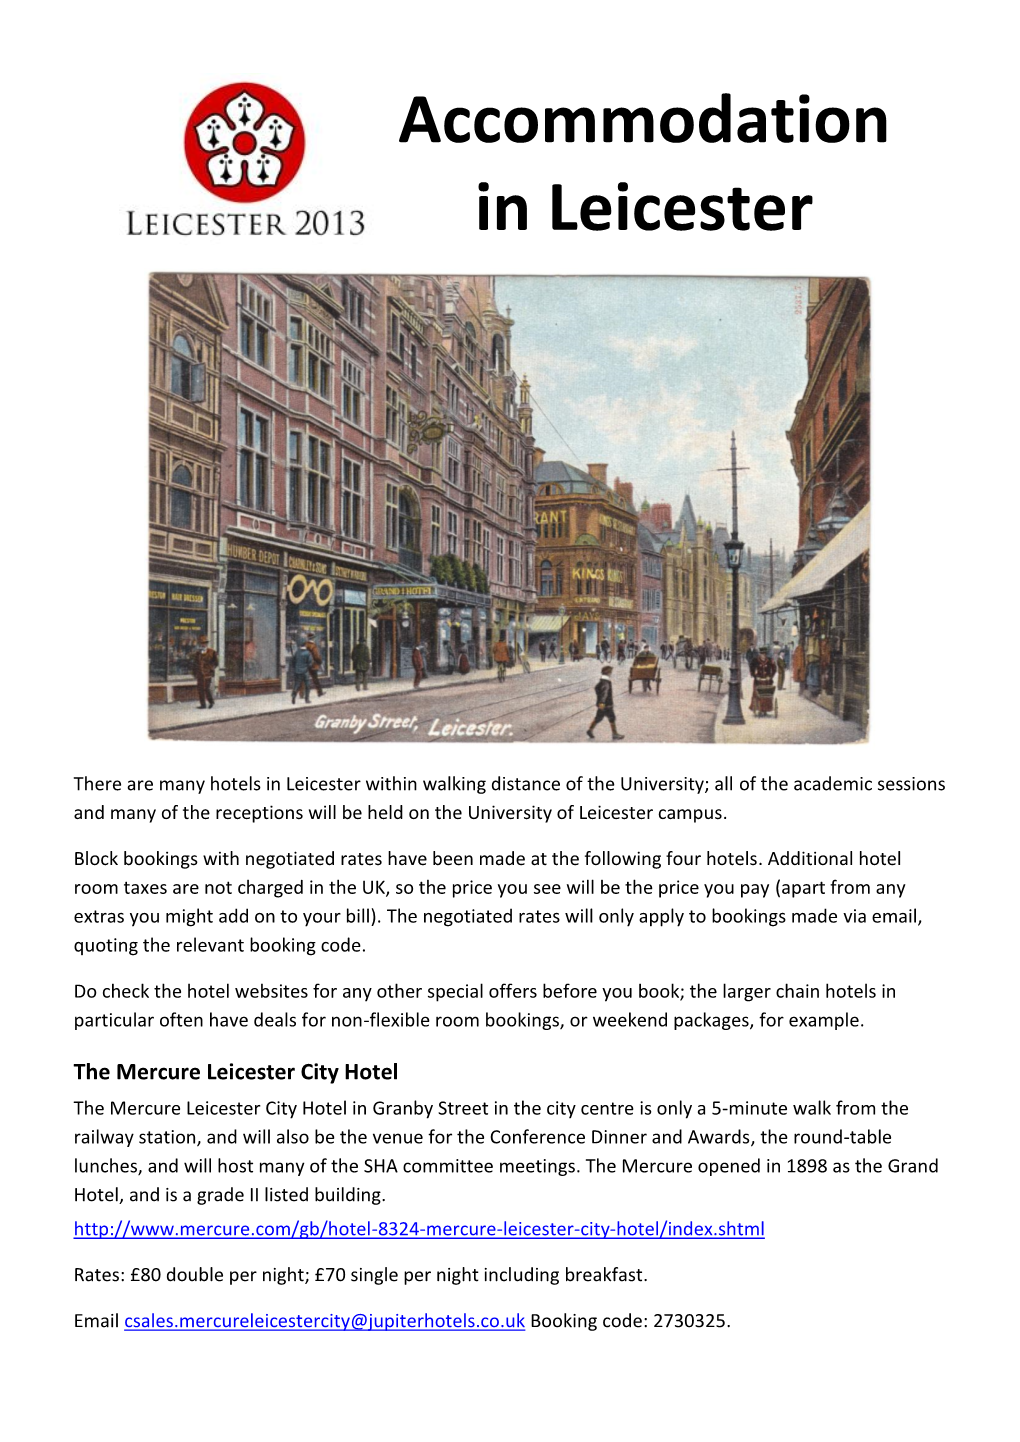 Accommodation in Leicester